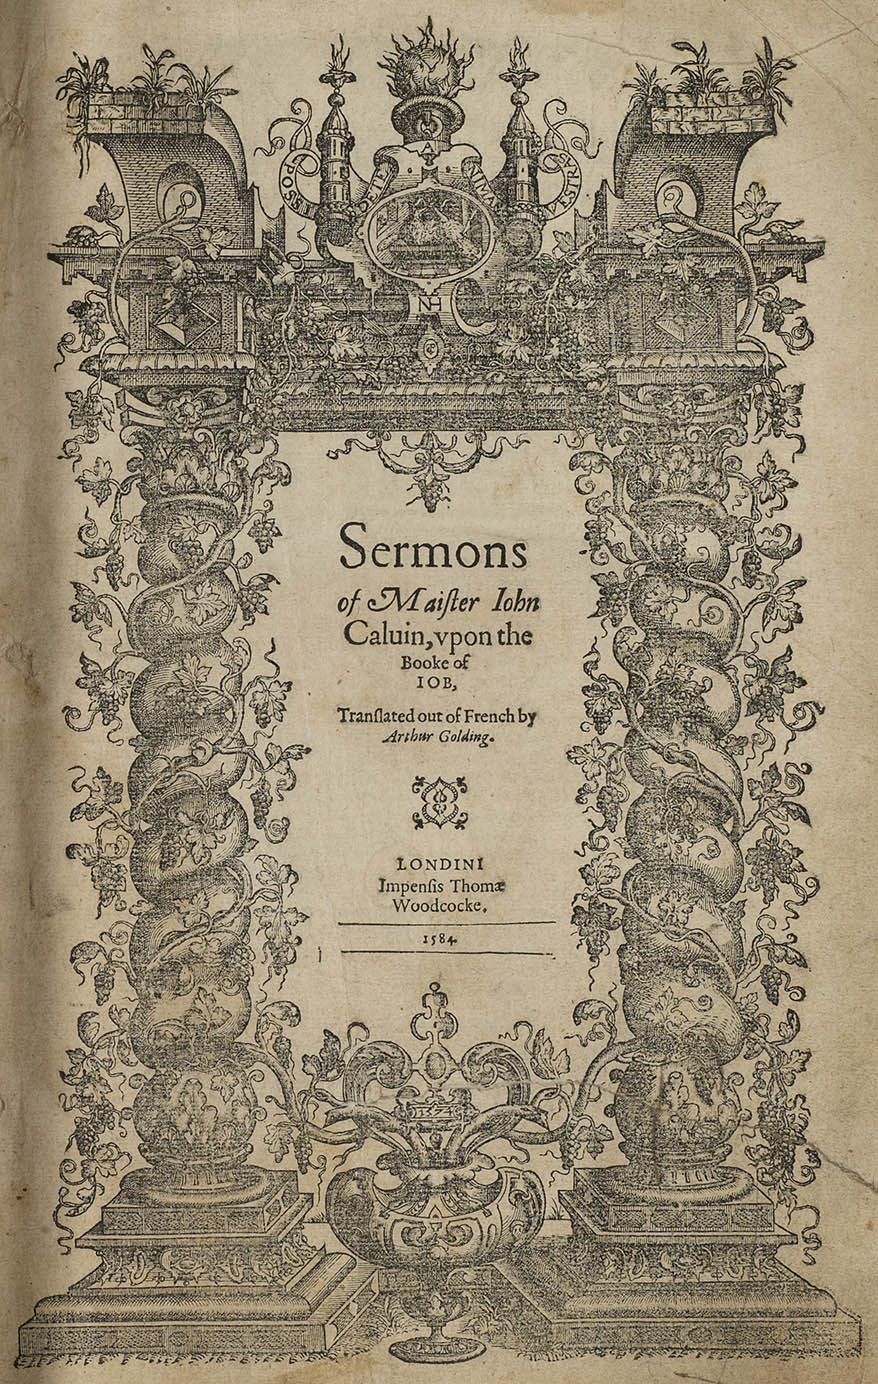 Calvin, Sermons, trans. Arthur Golding (1584), reproduced by permission of The University of Manchester Library